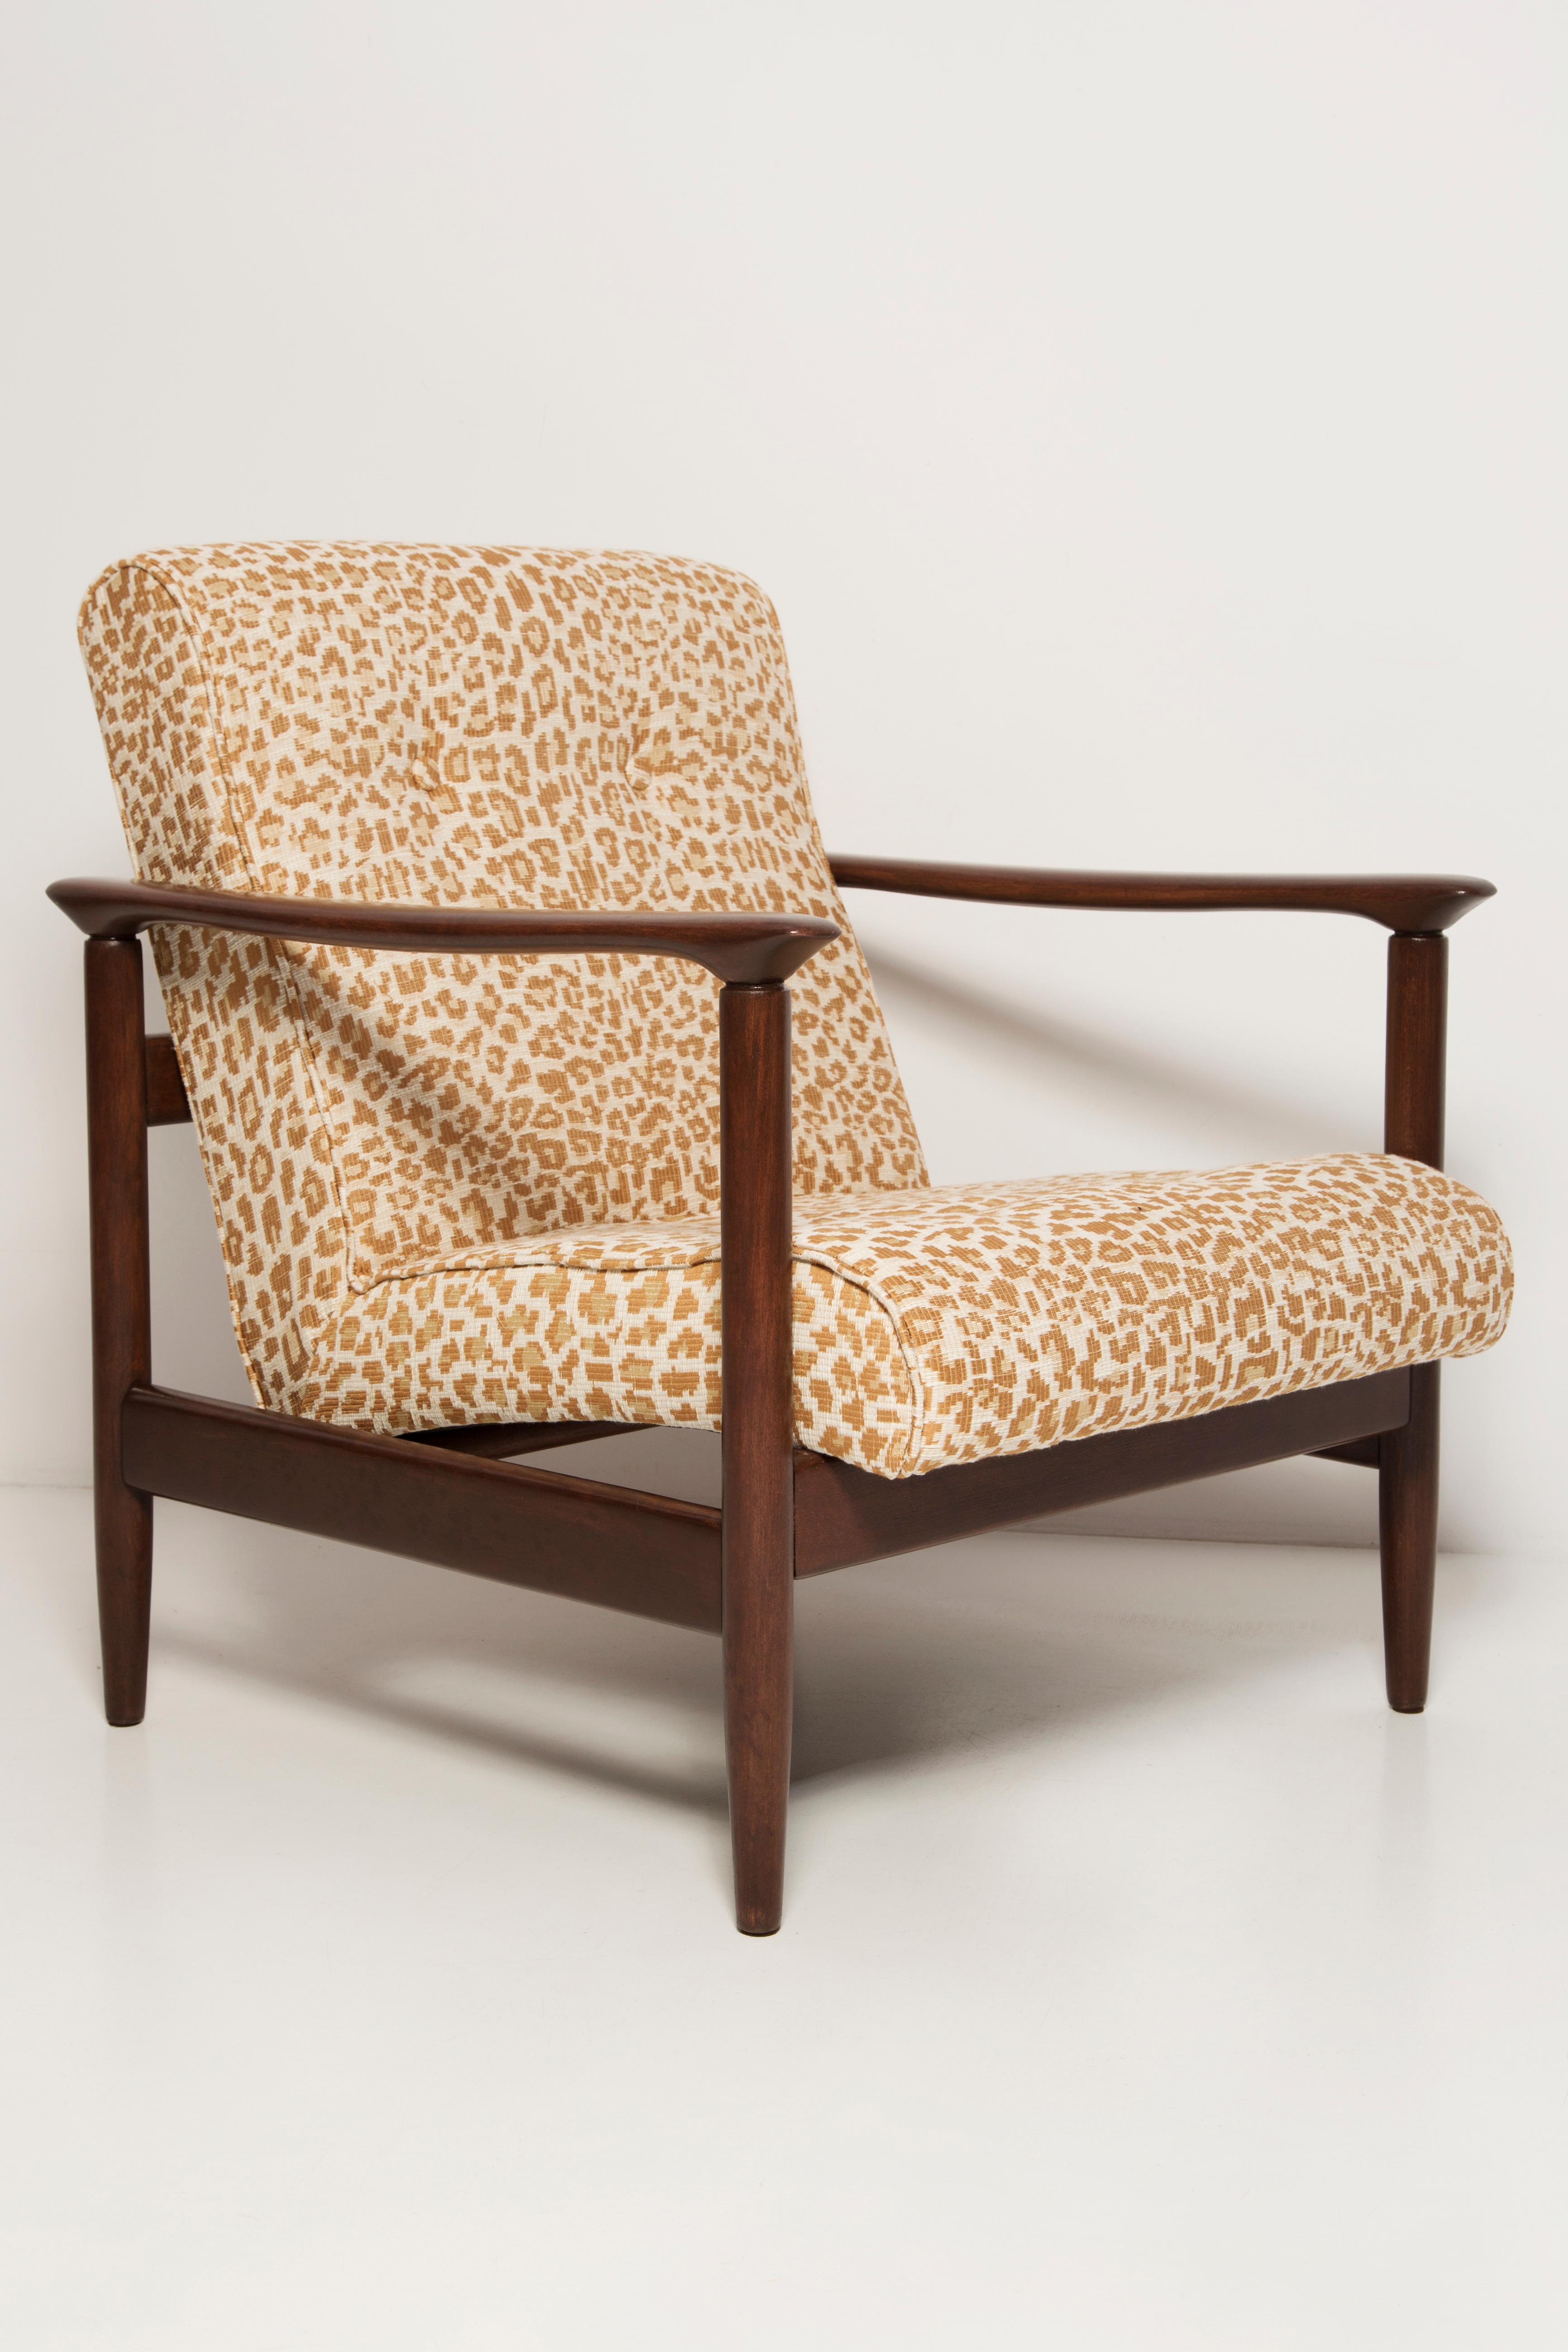 Mid-Century Modern Pair of Mid-Century Pixel Leopard Armchairs, GFM 142, Edmund Homa, Europe, 1960s For Sale